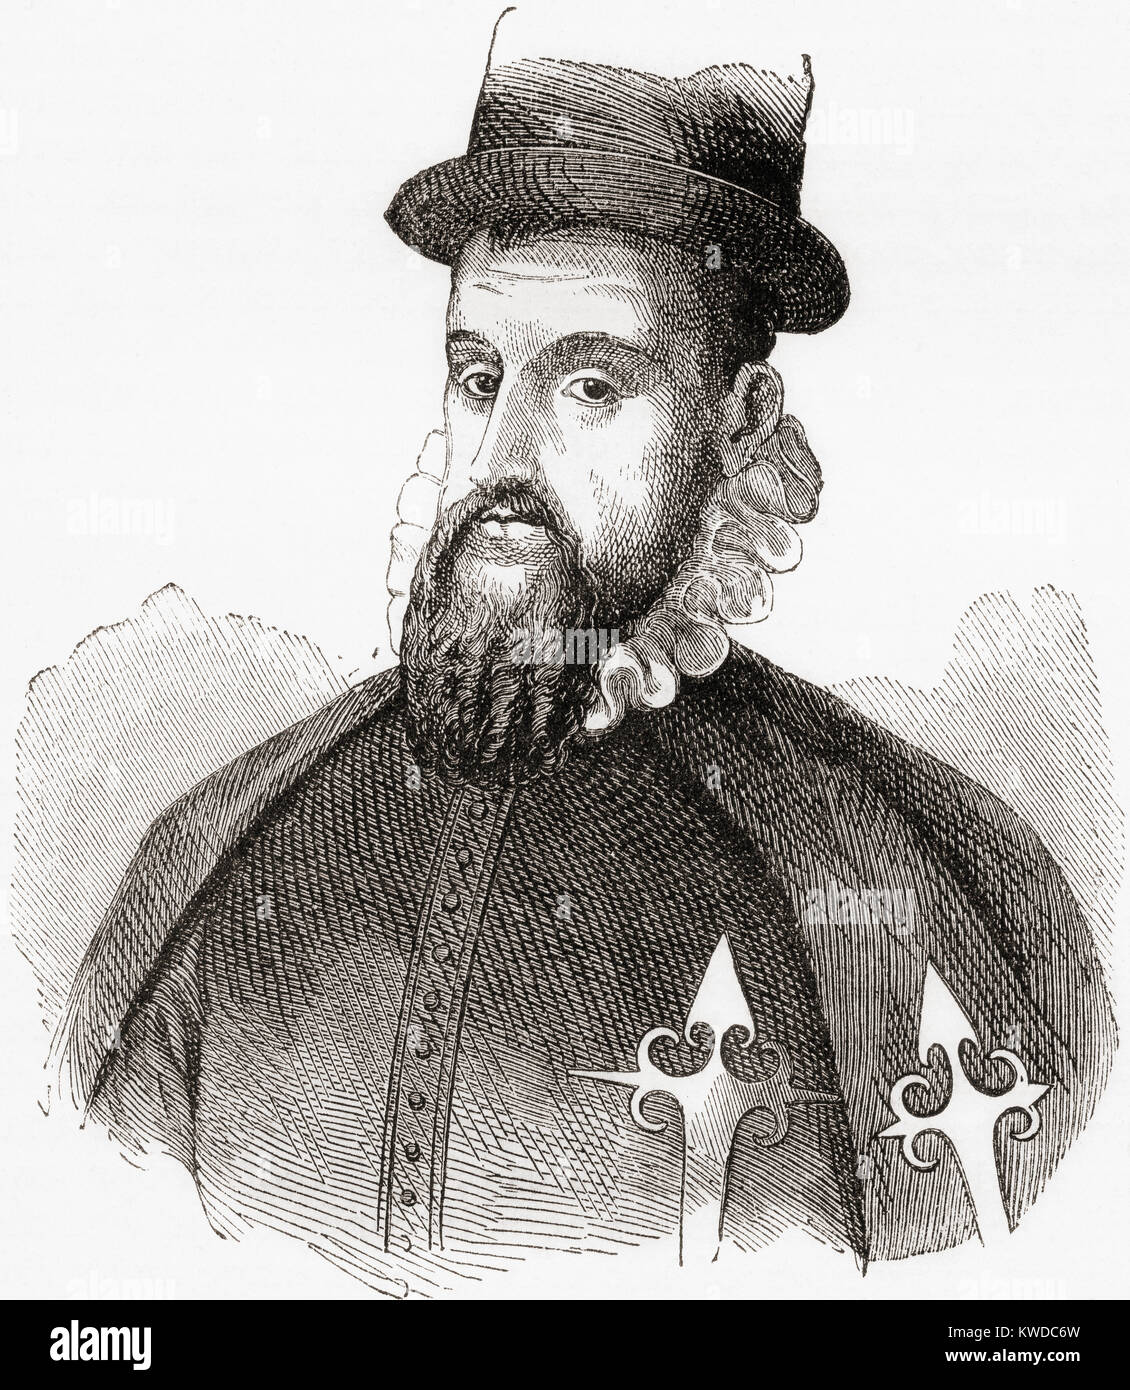 Francisco Pizarro González, c. 1471 – 1541.  Spanish conquistador who led an expedition that conquered the Inca Empire. From Ward and Lock's Illustrated History of the World, published c.1882. Stock Photo